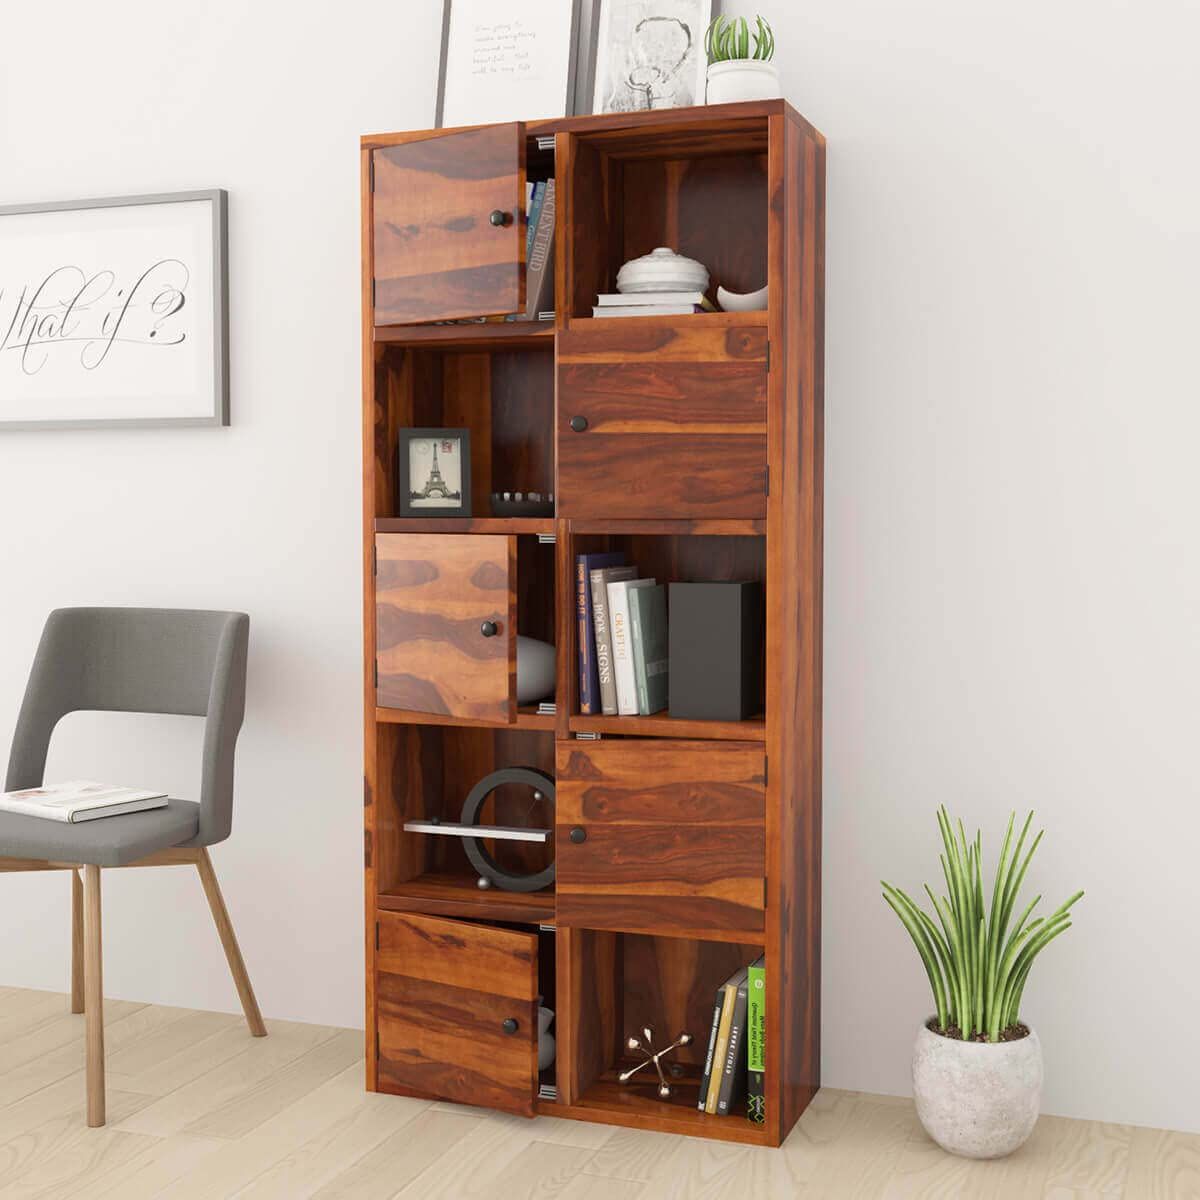 Aaram By Zebrs Furniture Town Prich Rustic Sheesham Solid Wood Bookcase